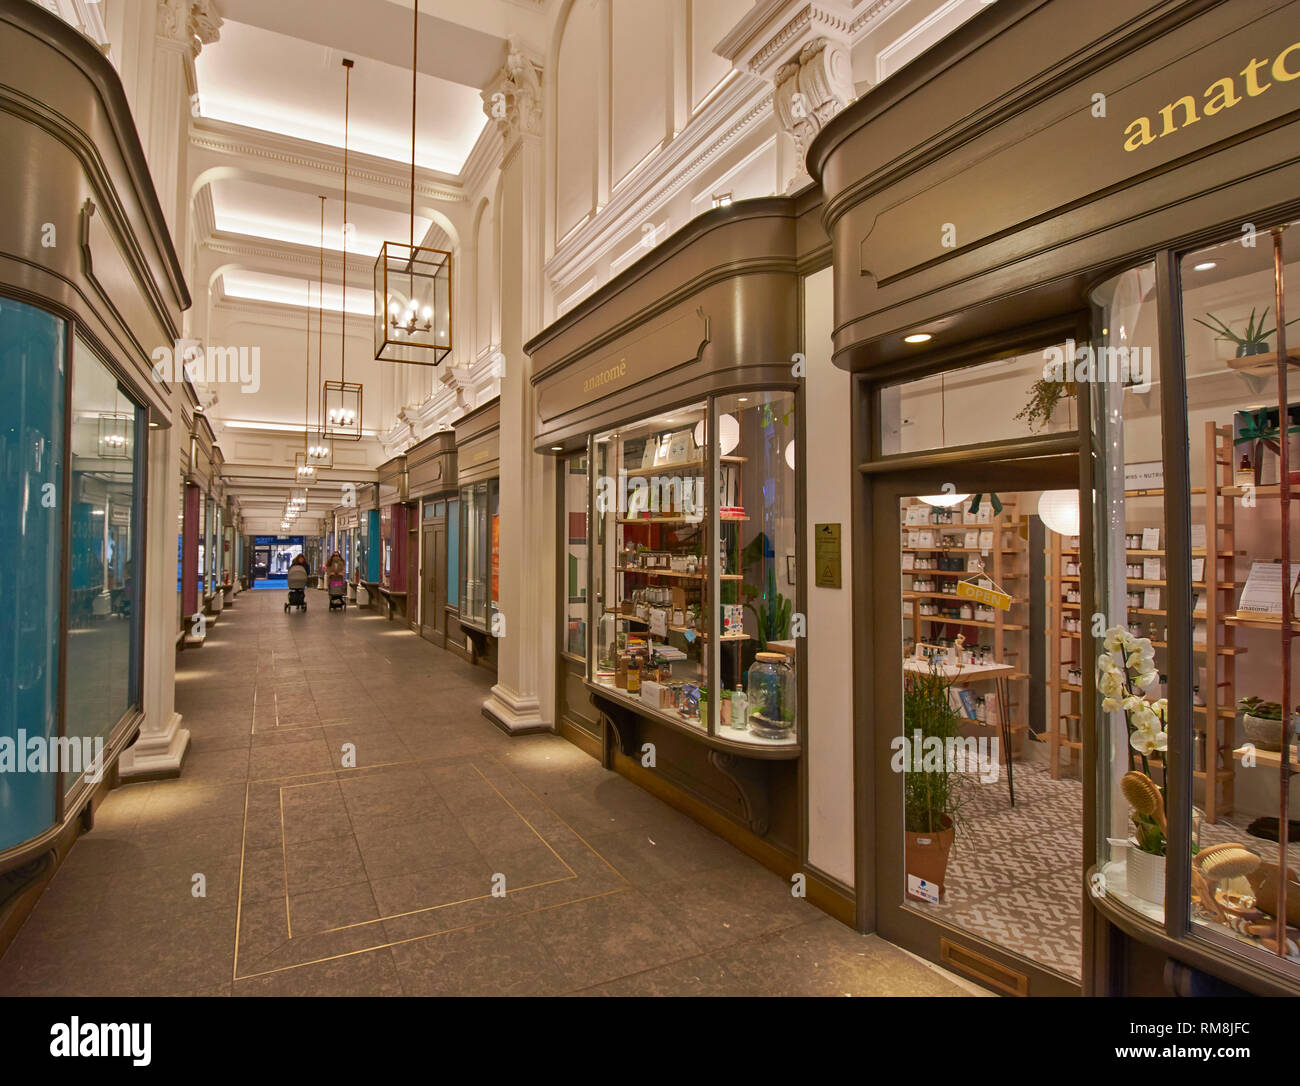 LONDON PICCADILLY PRINCES ARCADE AND SHOPS LOOKING TOWARDS JERMYN STREET Stock Photo